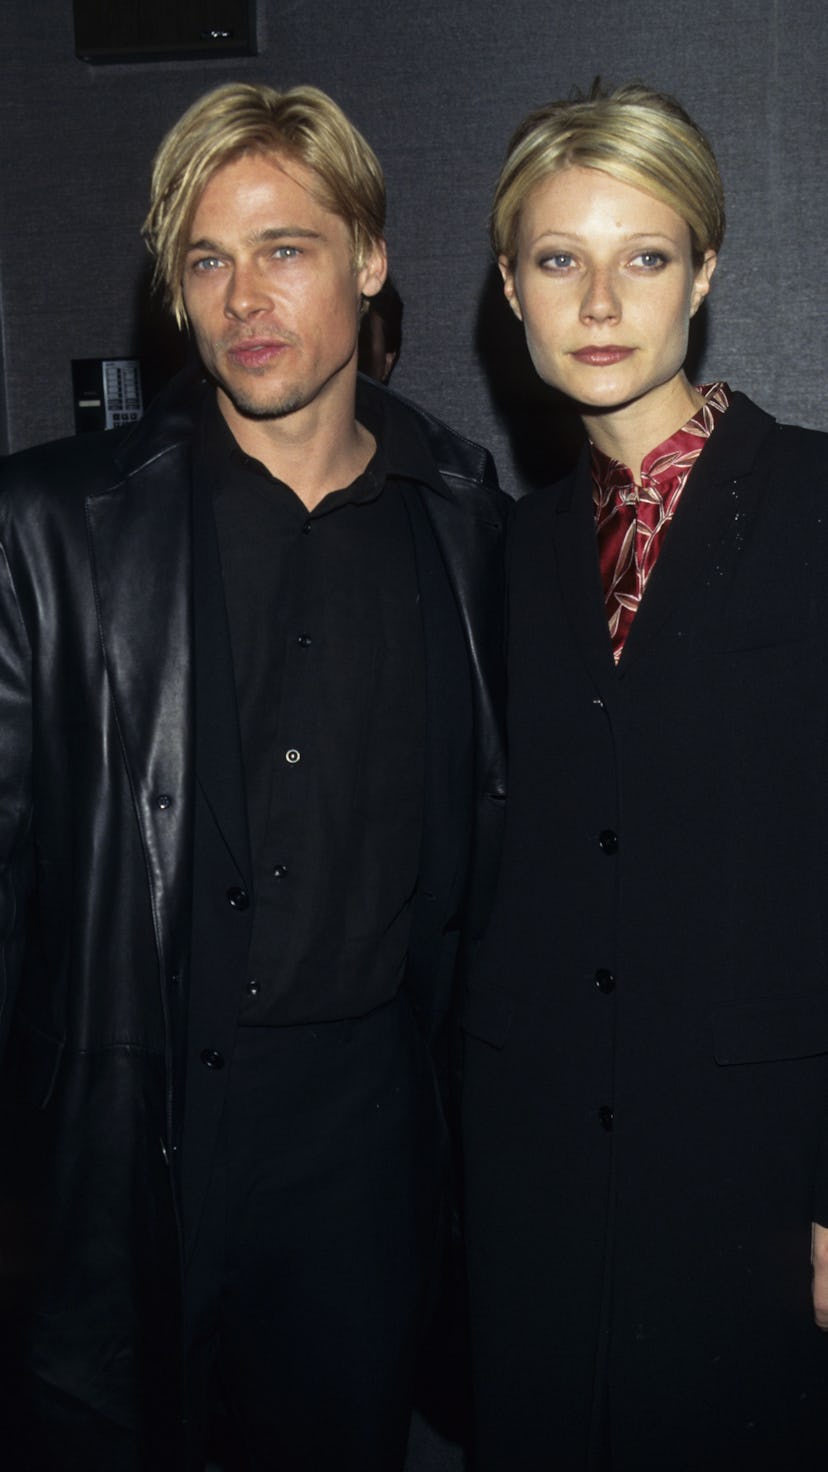 Brad Pitt and Gwyneth Paltrow had matching Karen haircuts before that style even had that name.  